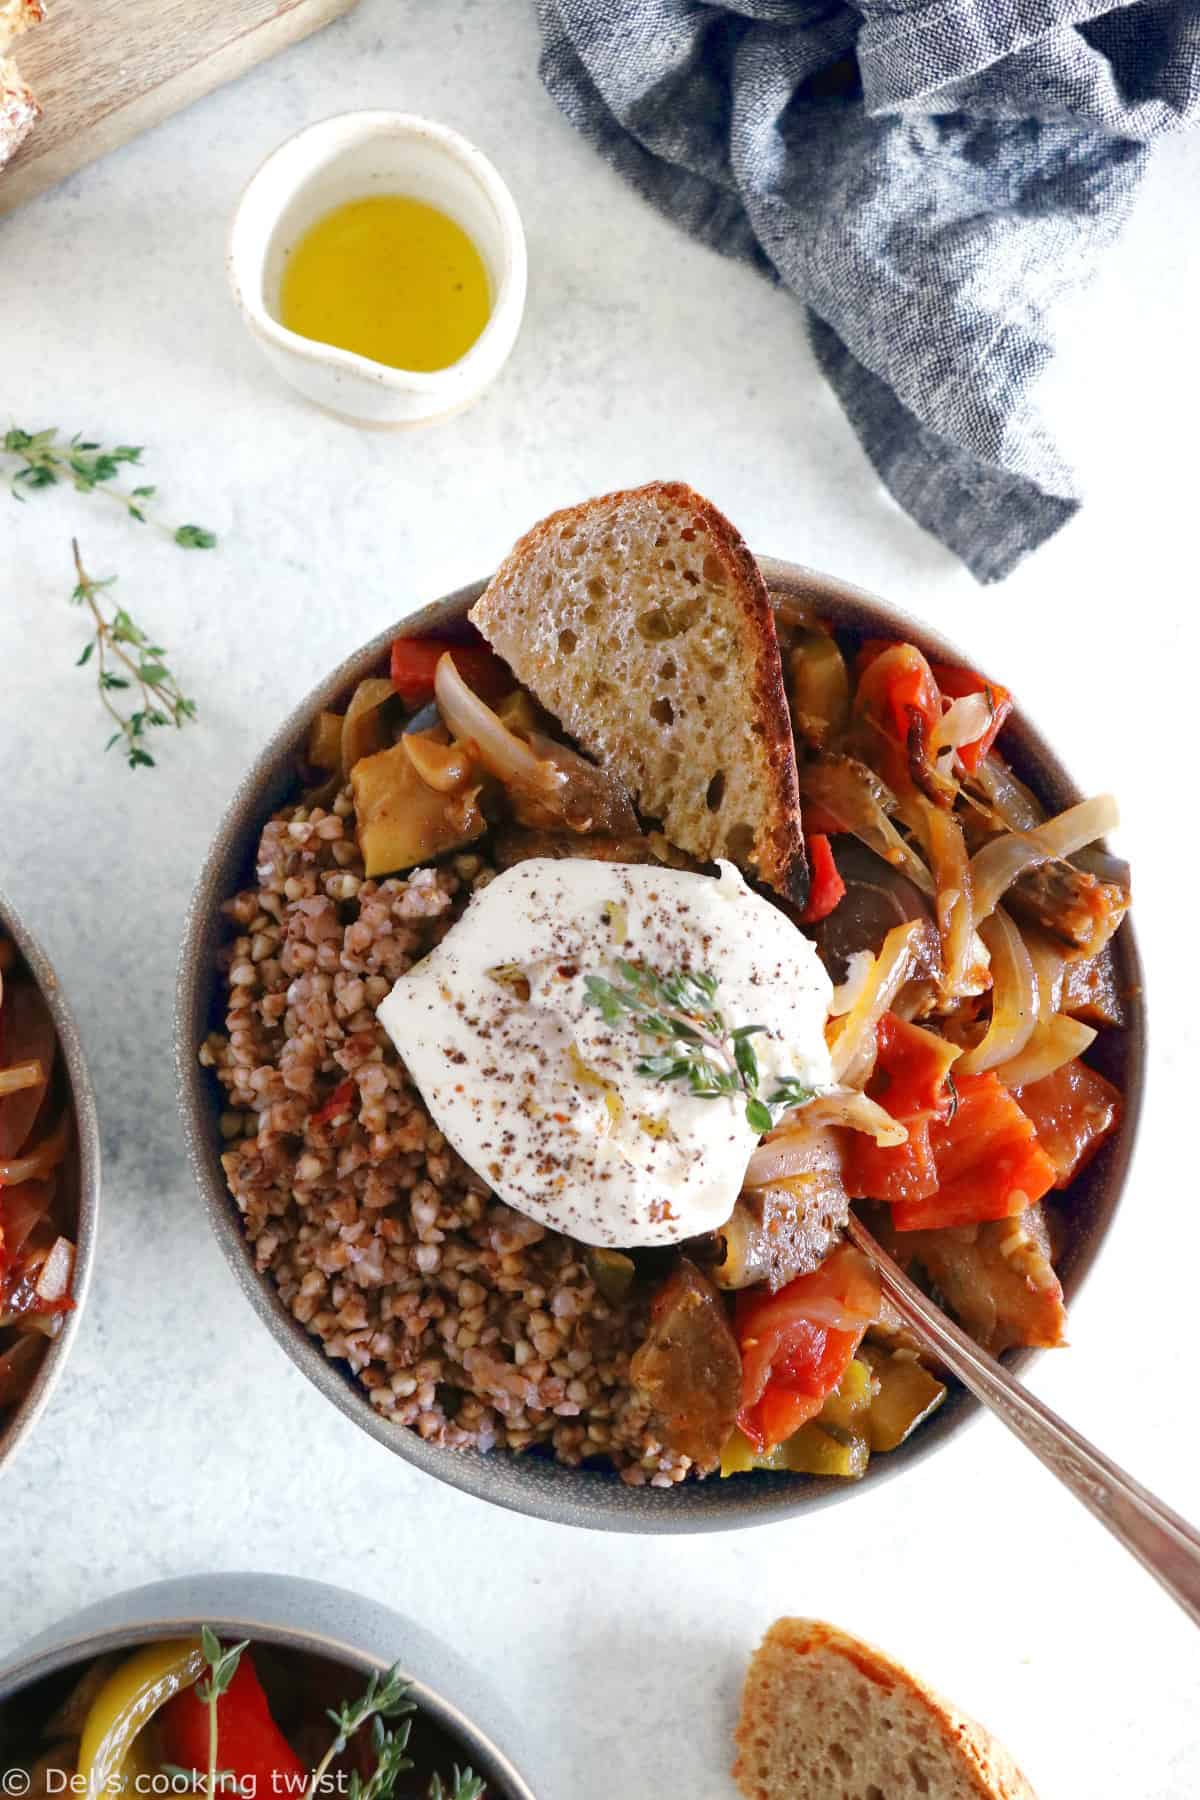 This French ratatouille bowl with buckwheat and burrata cheese makes a wholesome and satisfying meal.